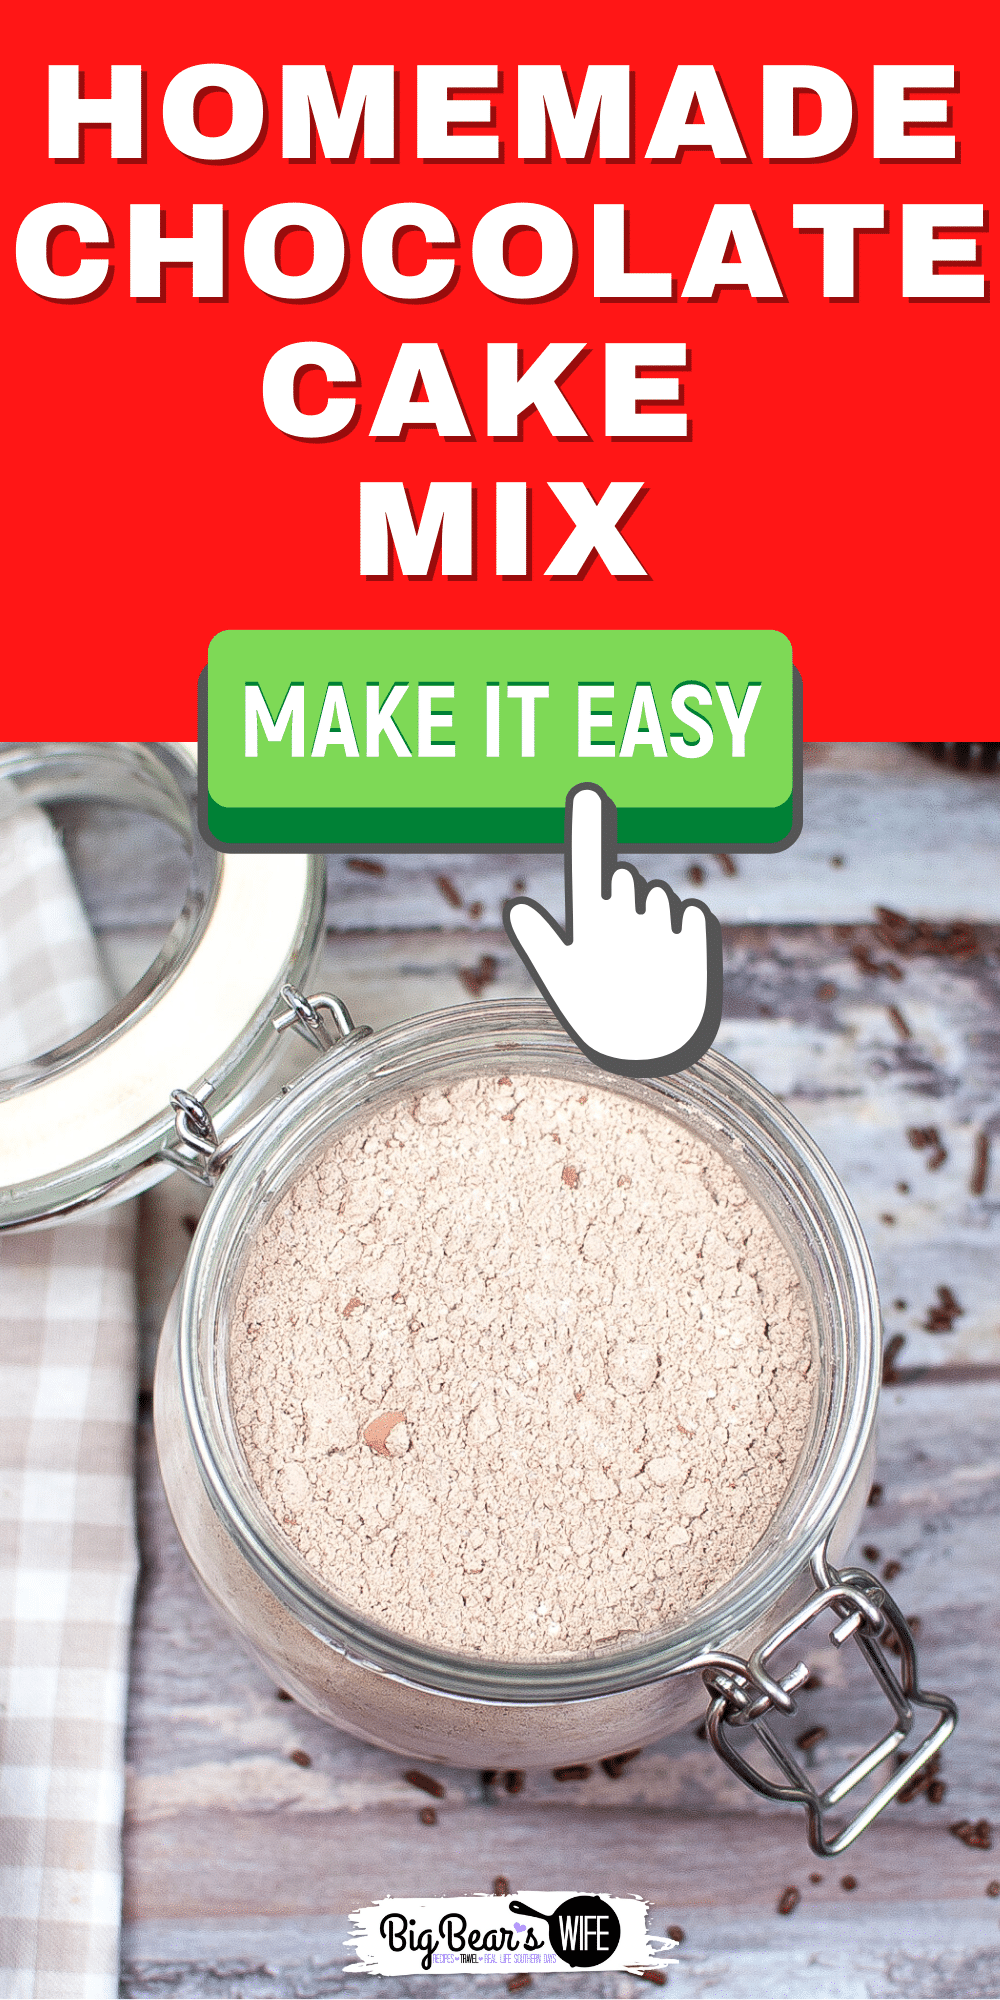 This easy Homemade Chocolate Cake Mix takes 5 minutes to whisk together and it is perfect for keeping on hand in the pantry for those chocolate cupcake cravings or last minute party needs! This mix is just as easy as boxed cake mix but 100% homemade!  via @bigbearswife